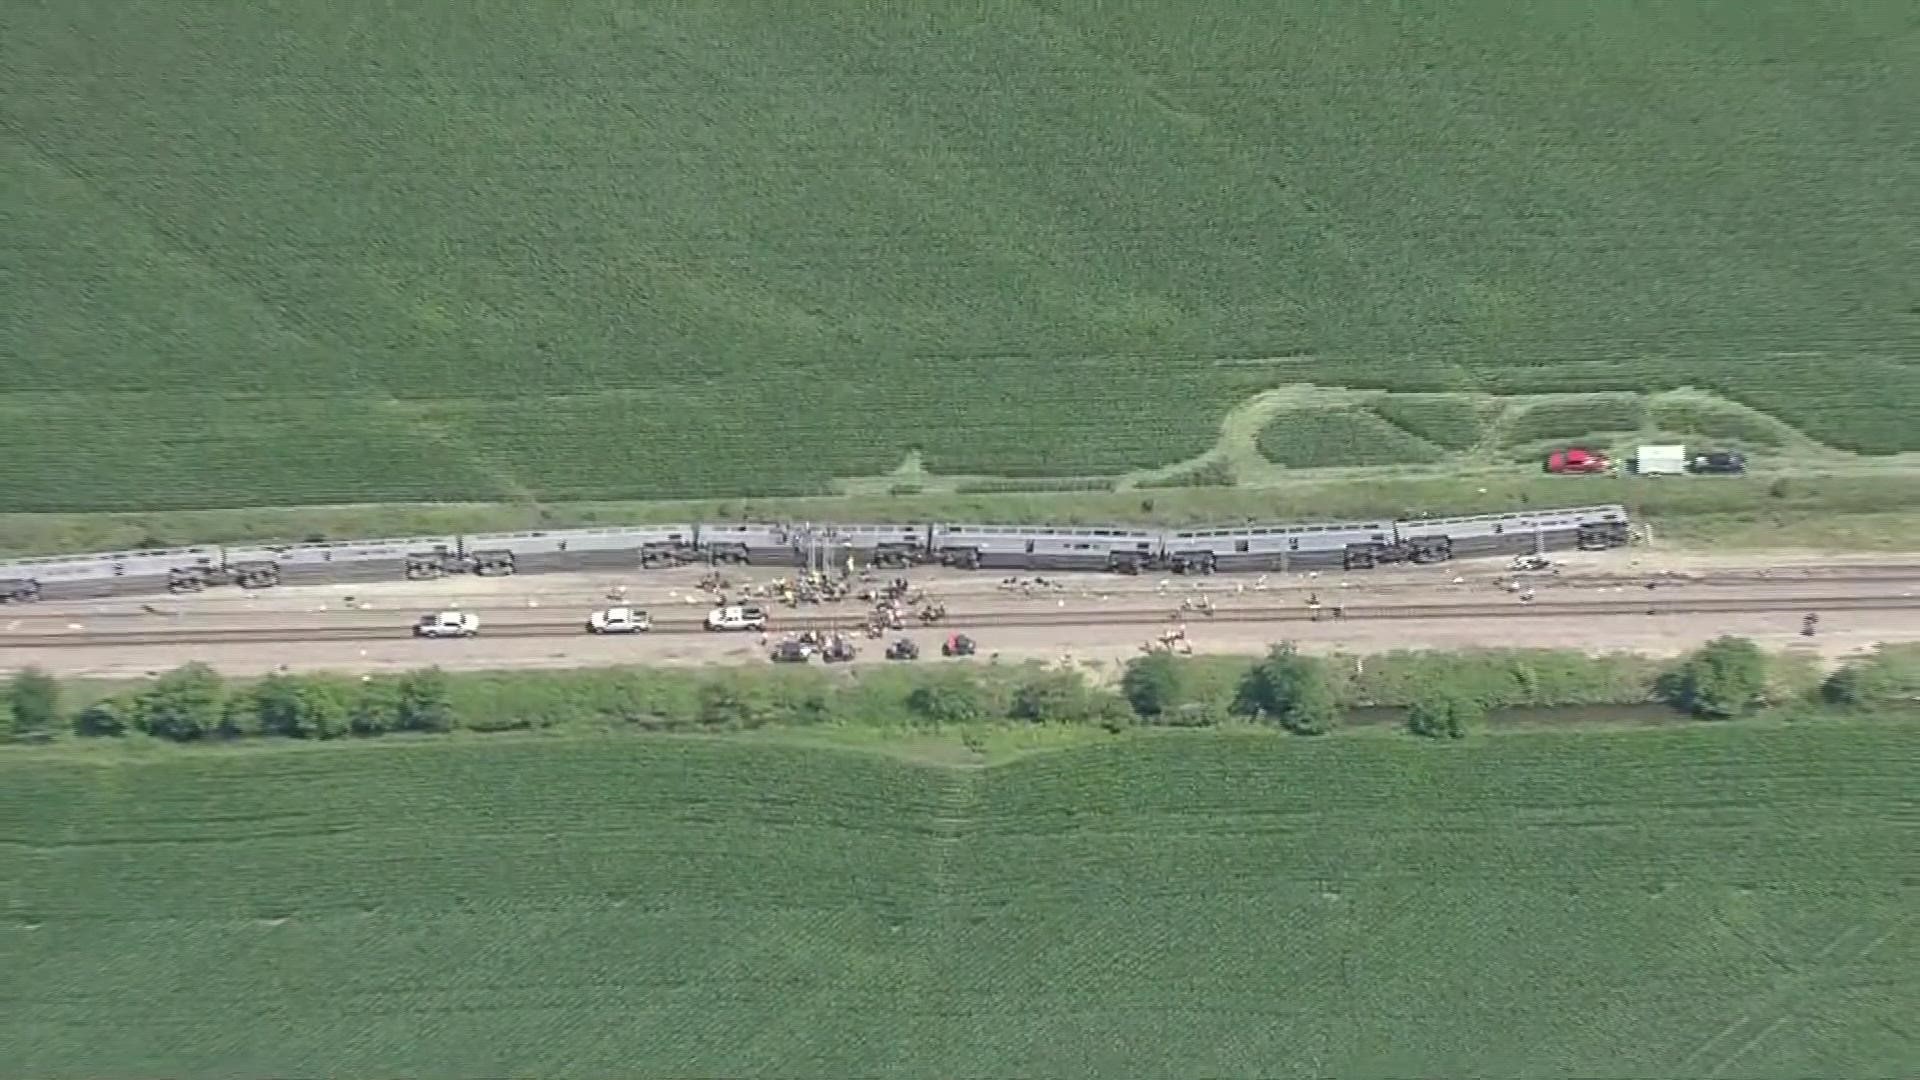 Amtrak said multiple injuries were reported after a train struck a dump truck in Mendon, Missouri. Credit: KMBC/CNN